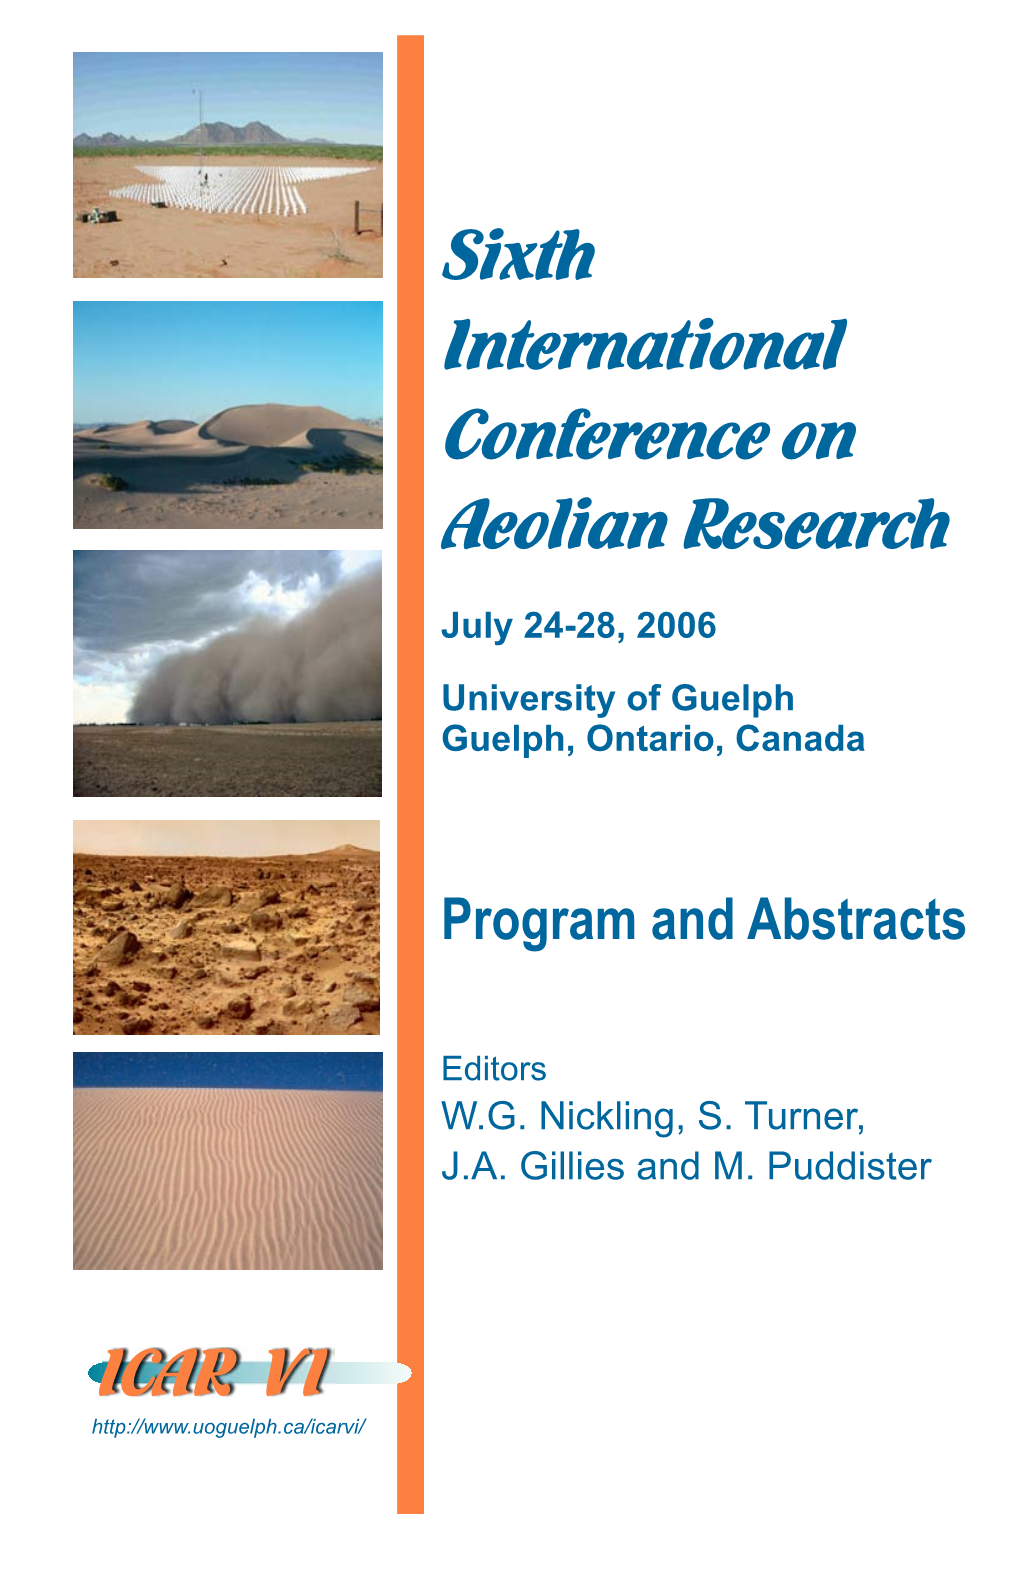 Sixth International Conference on Aeolian Research